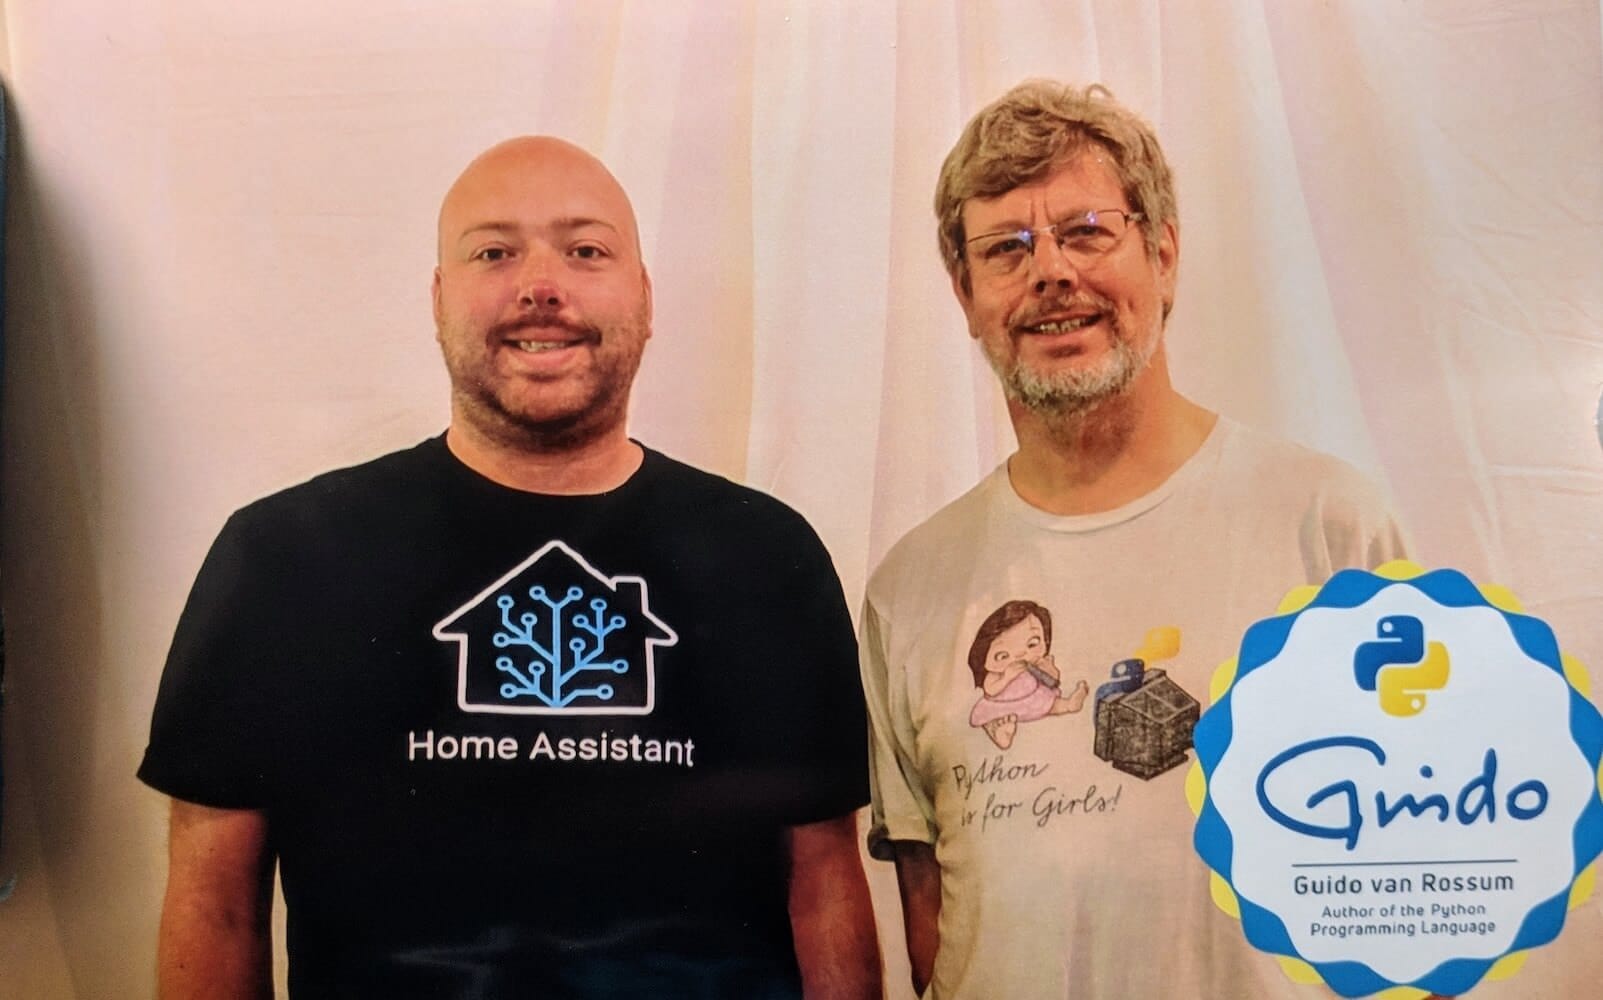 Photo of Paulus, founder of Home Assistant, and Guido, founder of Python.